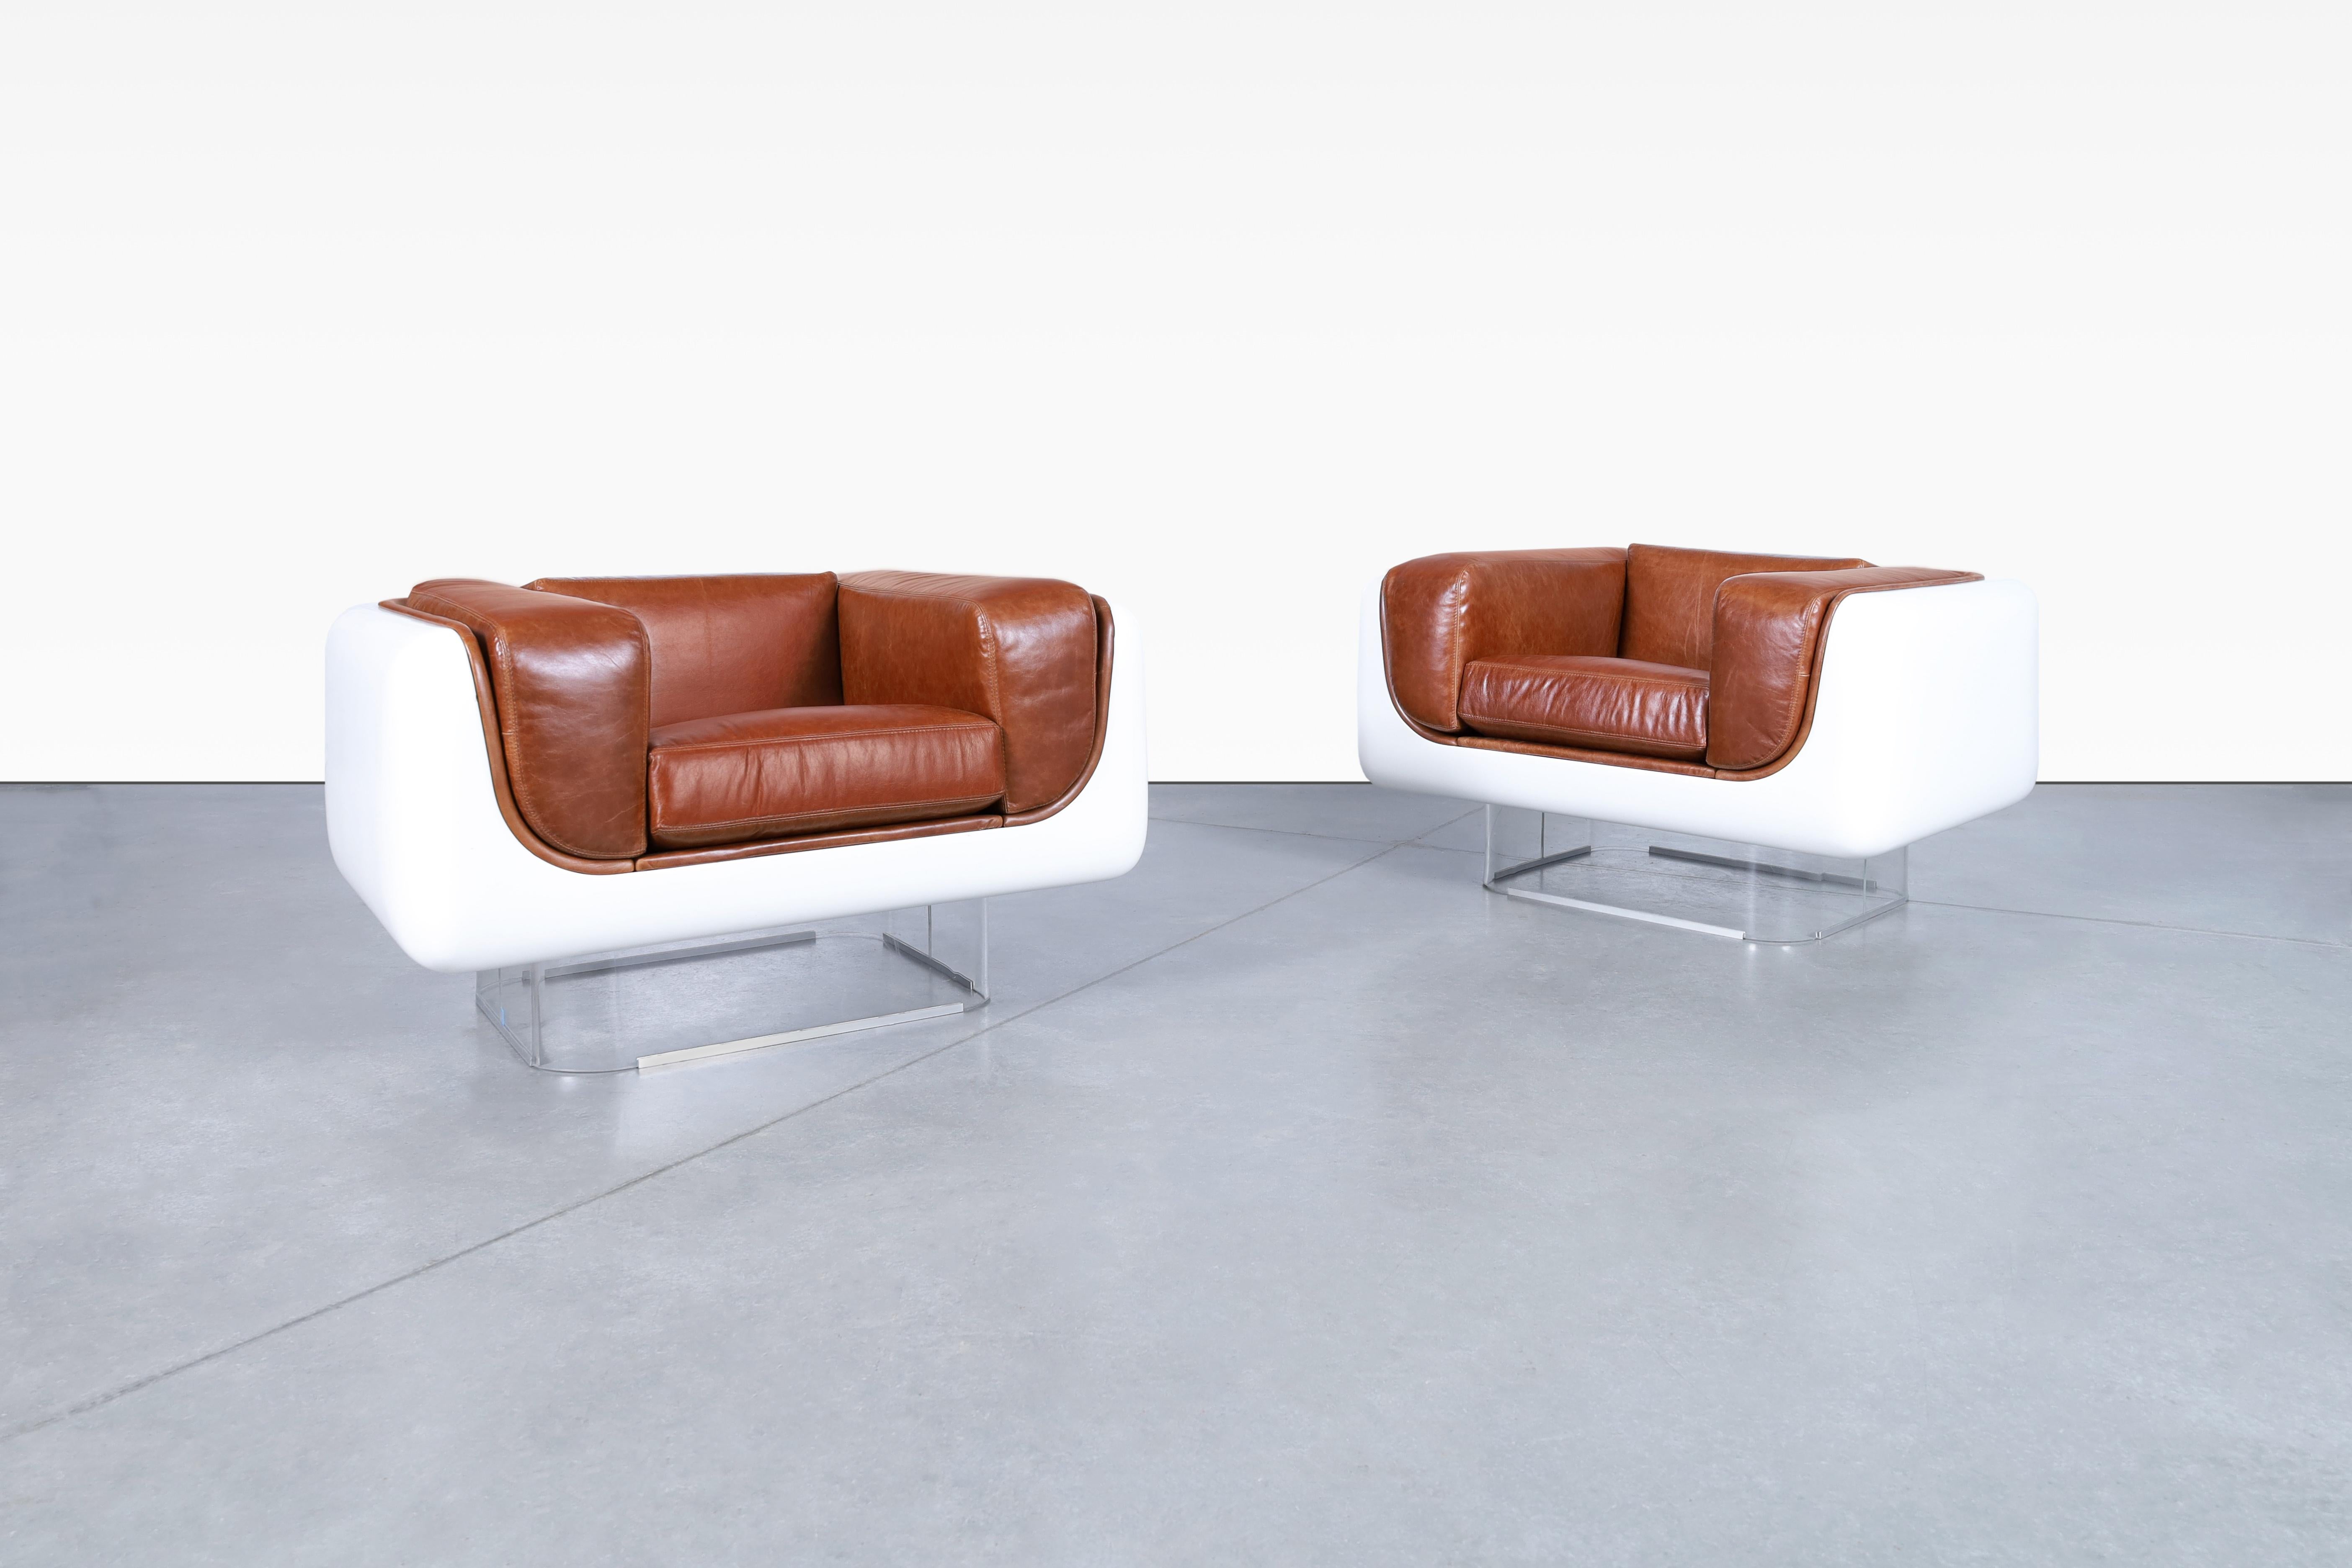 Wonderful vintage leather and lucite lounge chairs designed by William C. Andrus for Steelcase in the United States, circa 1970’s. The newly reupholstered chairs are truly a sight to behold. They are not just stunning pieces of furniture but works